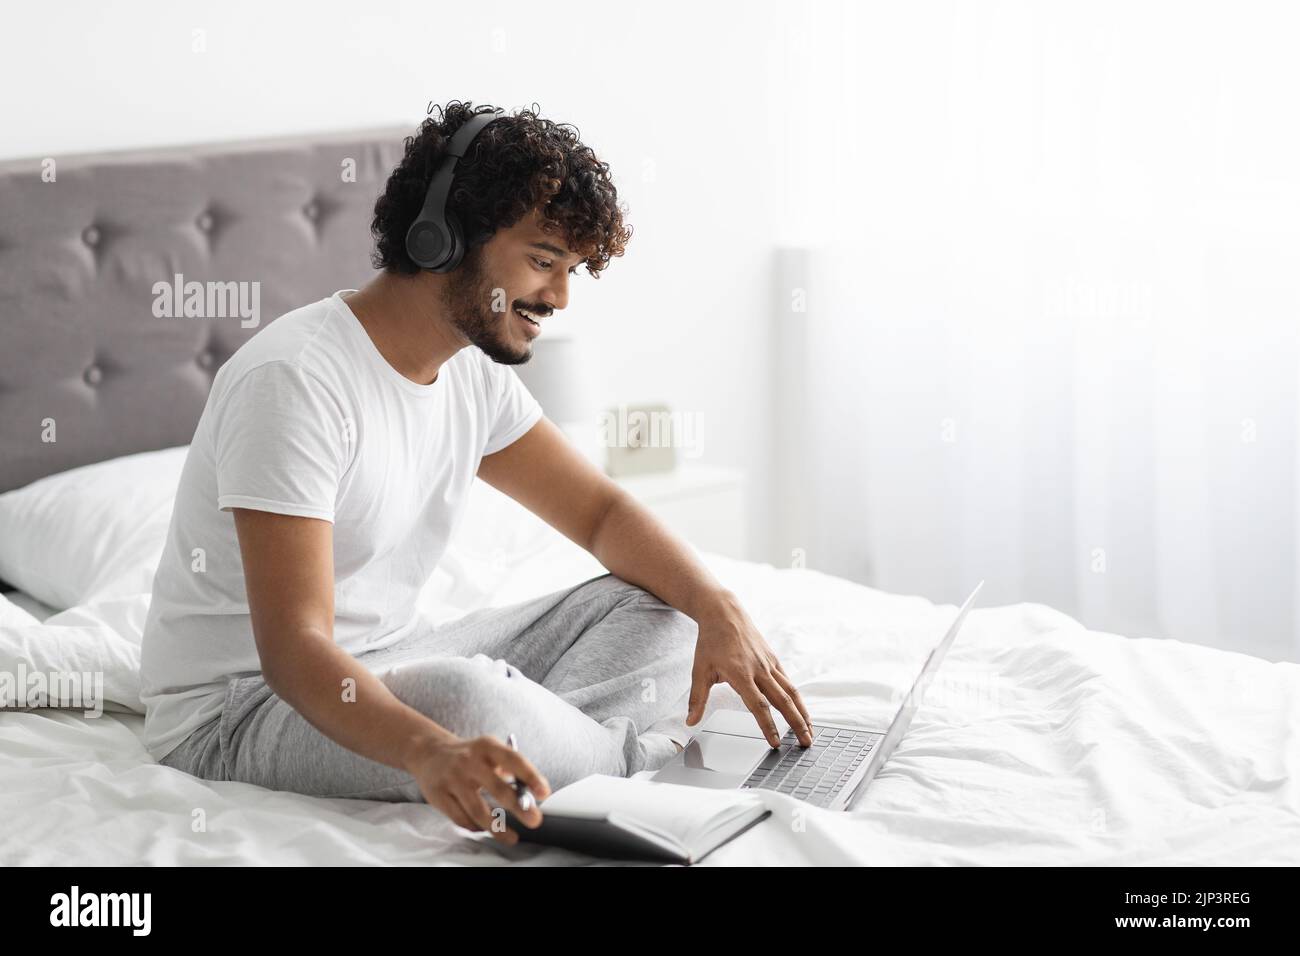 Happy eastern guy studying in bed, using laptop Stock Photo